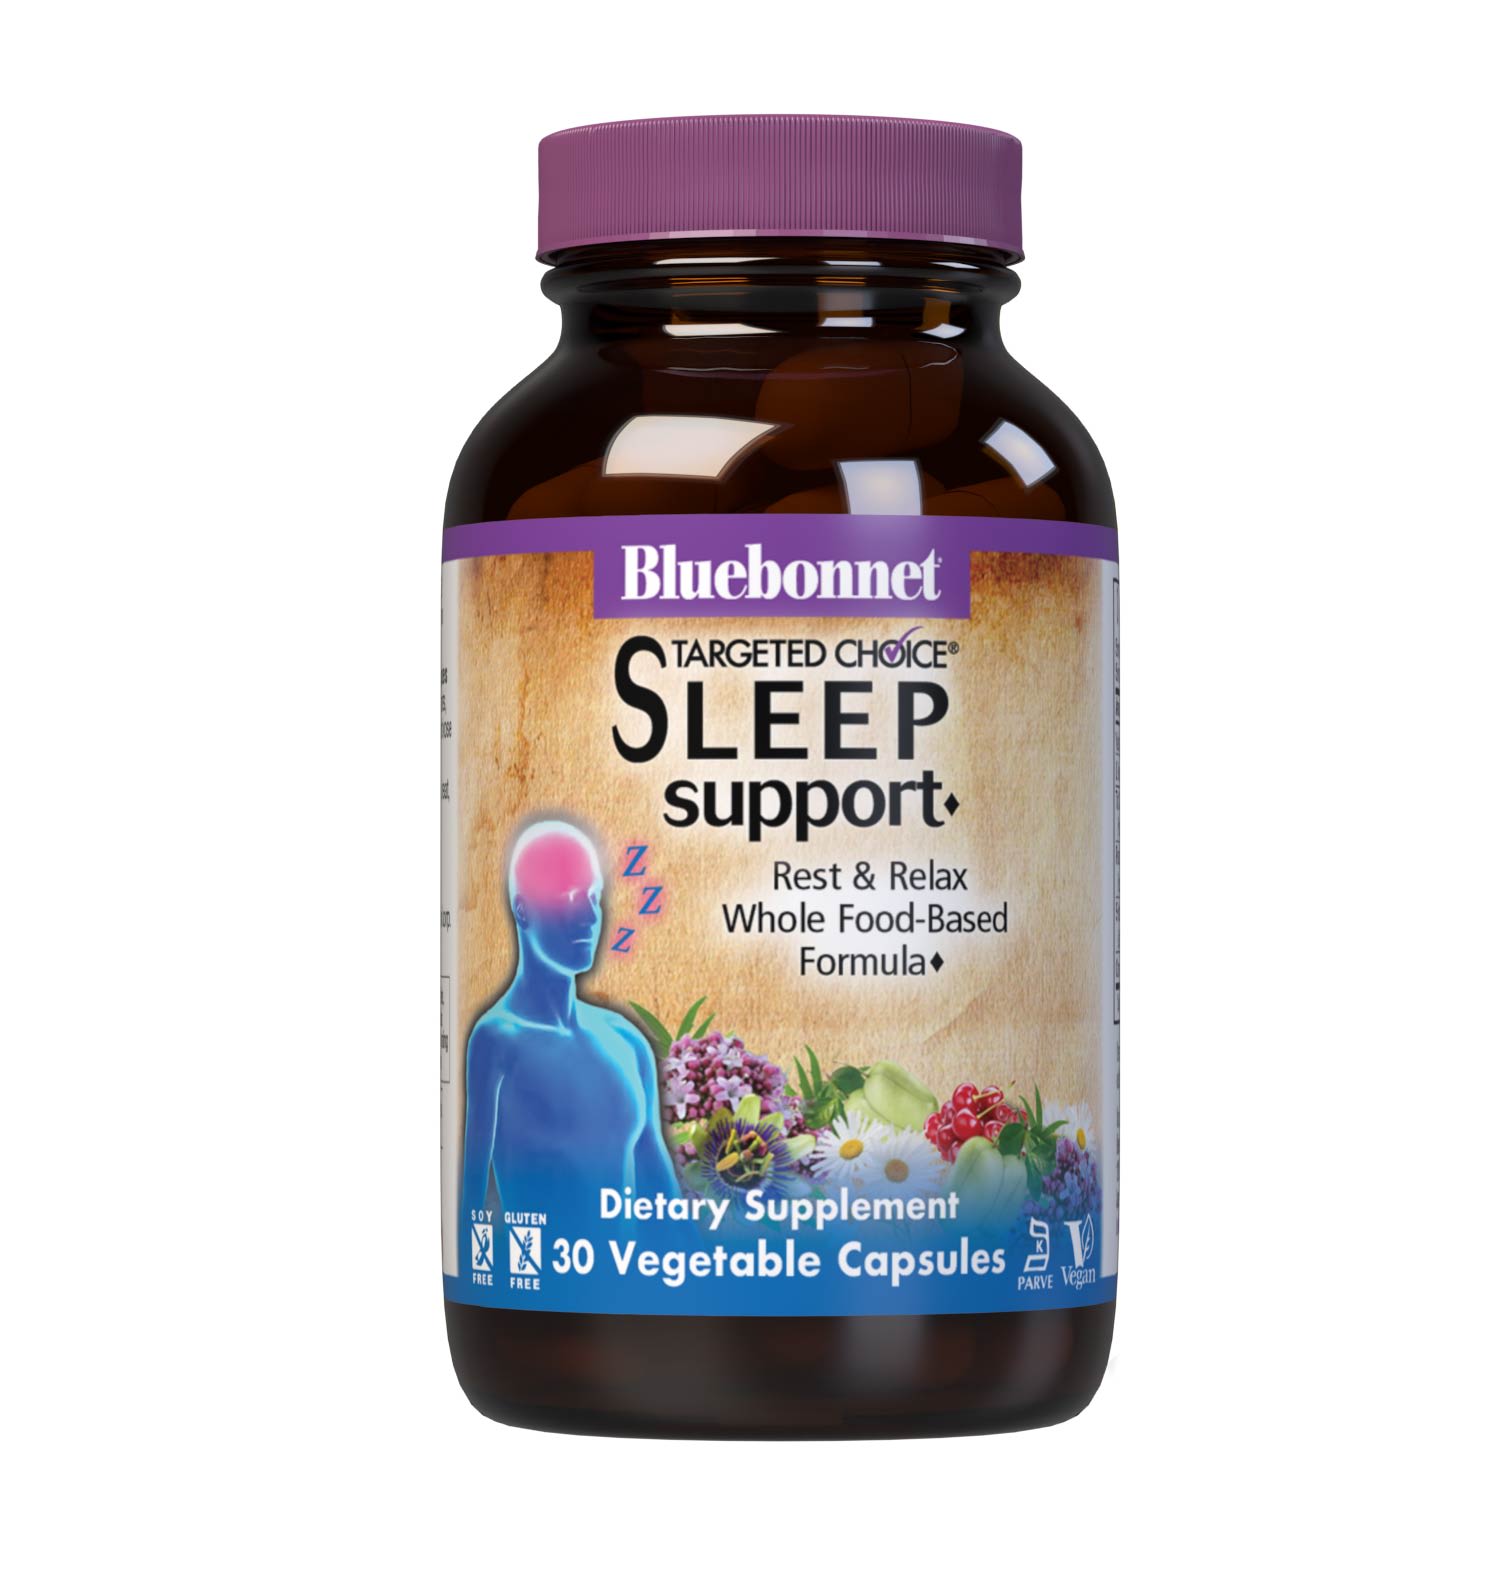 Bluebonnet’s Targeted Choice Sleep Support 30 Vegetable Capsules are specially formulated with a unique blend of whole food nutrients, amino acids and herbal extracts to help promote restful sleep for those affected by occasional sleeplessness. #size_30 count